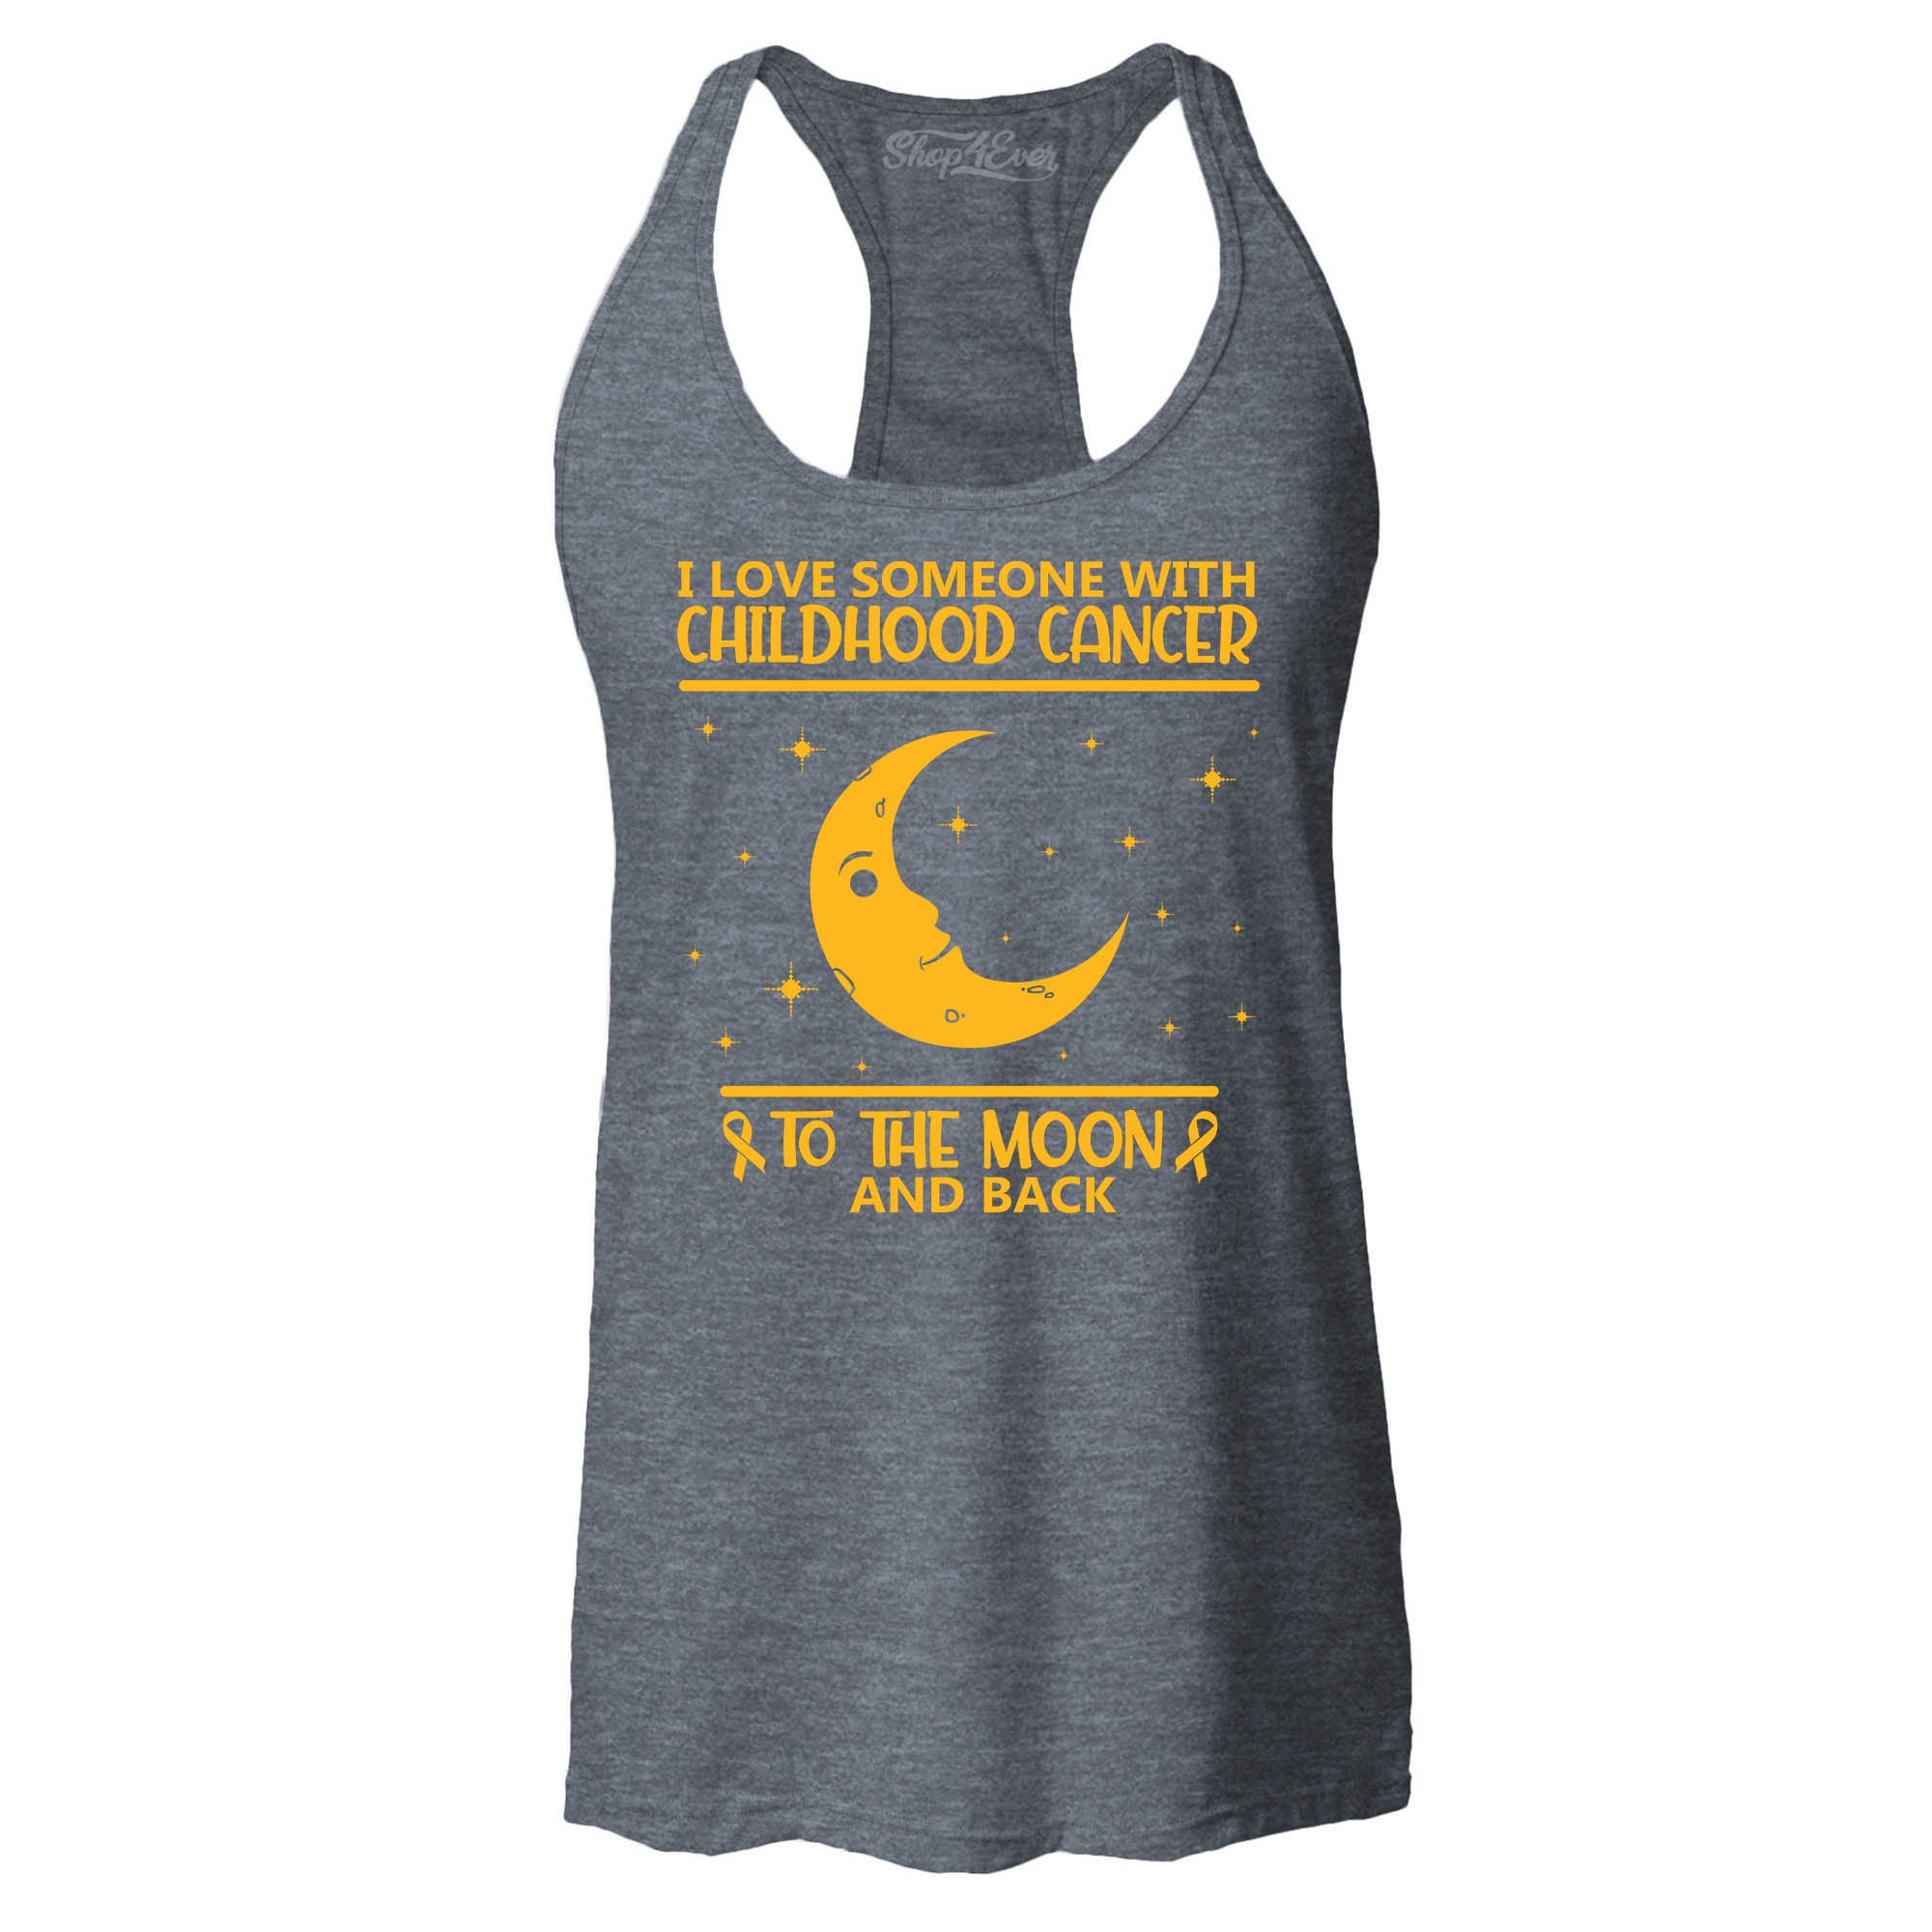 I Love Someone with Childhood Cancer to The Moon and Back Women's Racerback Tank Top Slim Fit